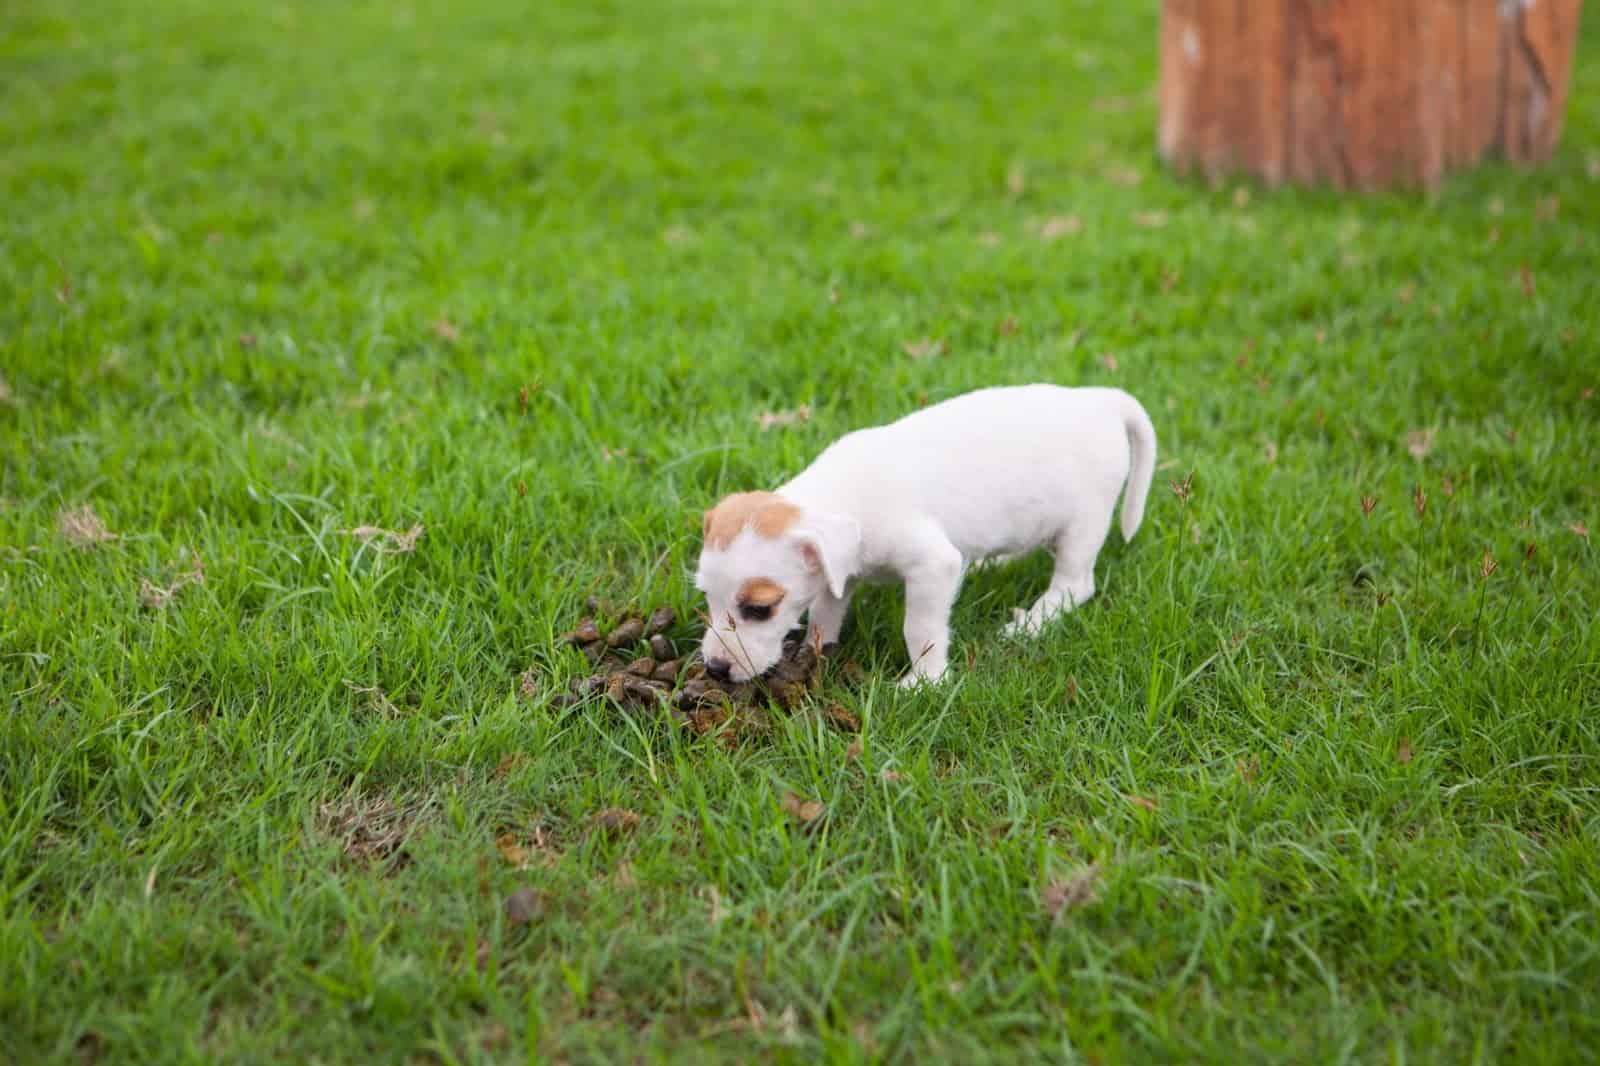 why does your puppy eat other animal's poop